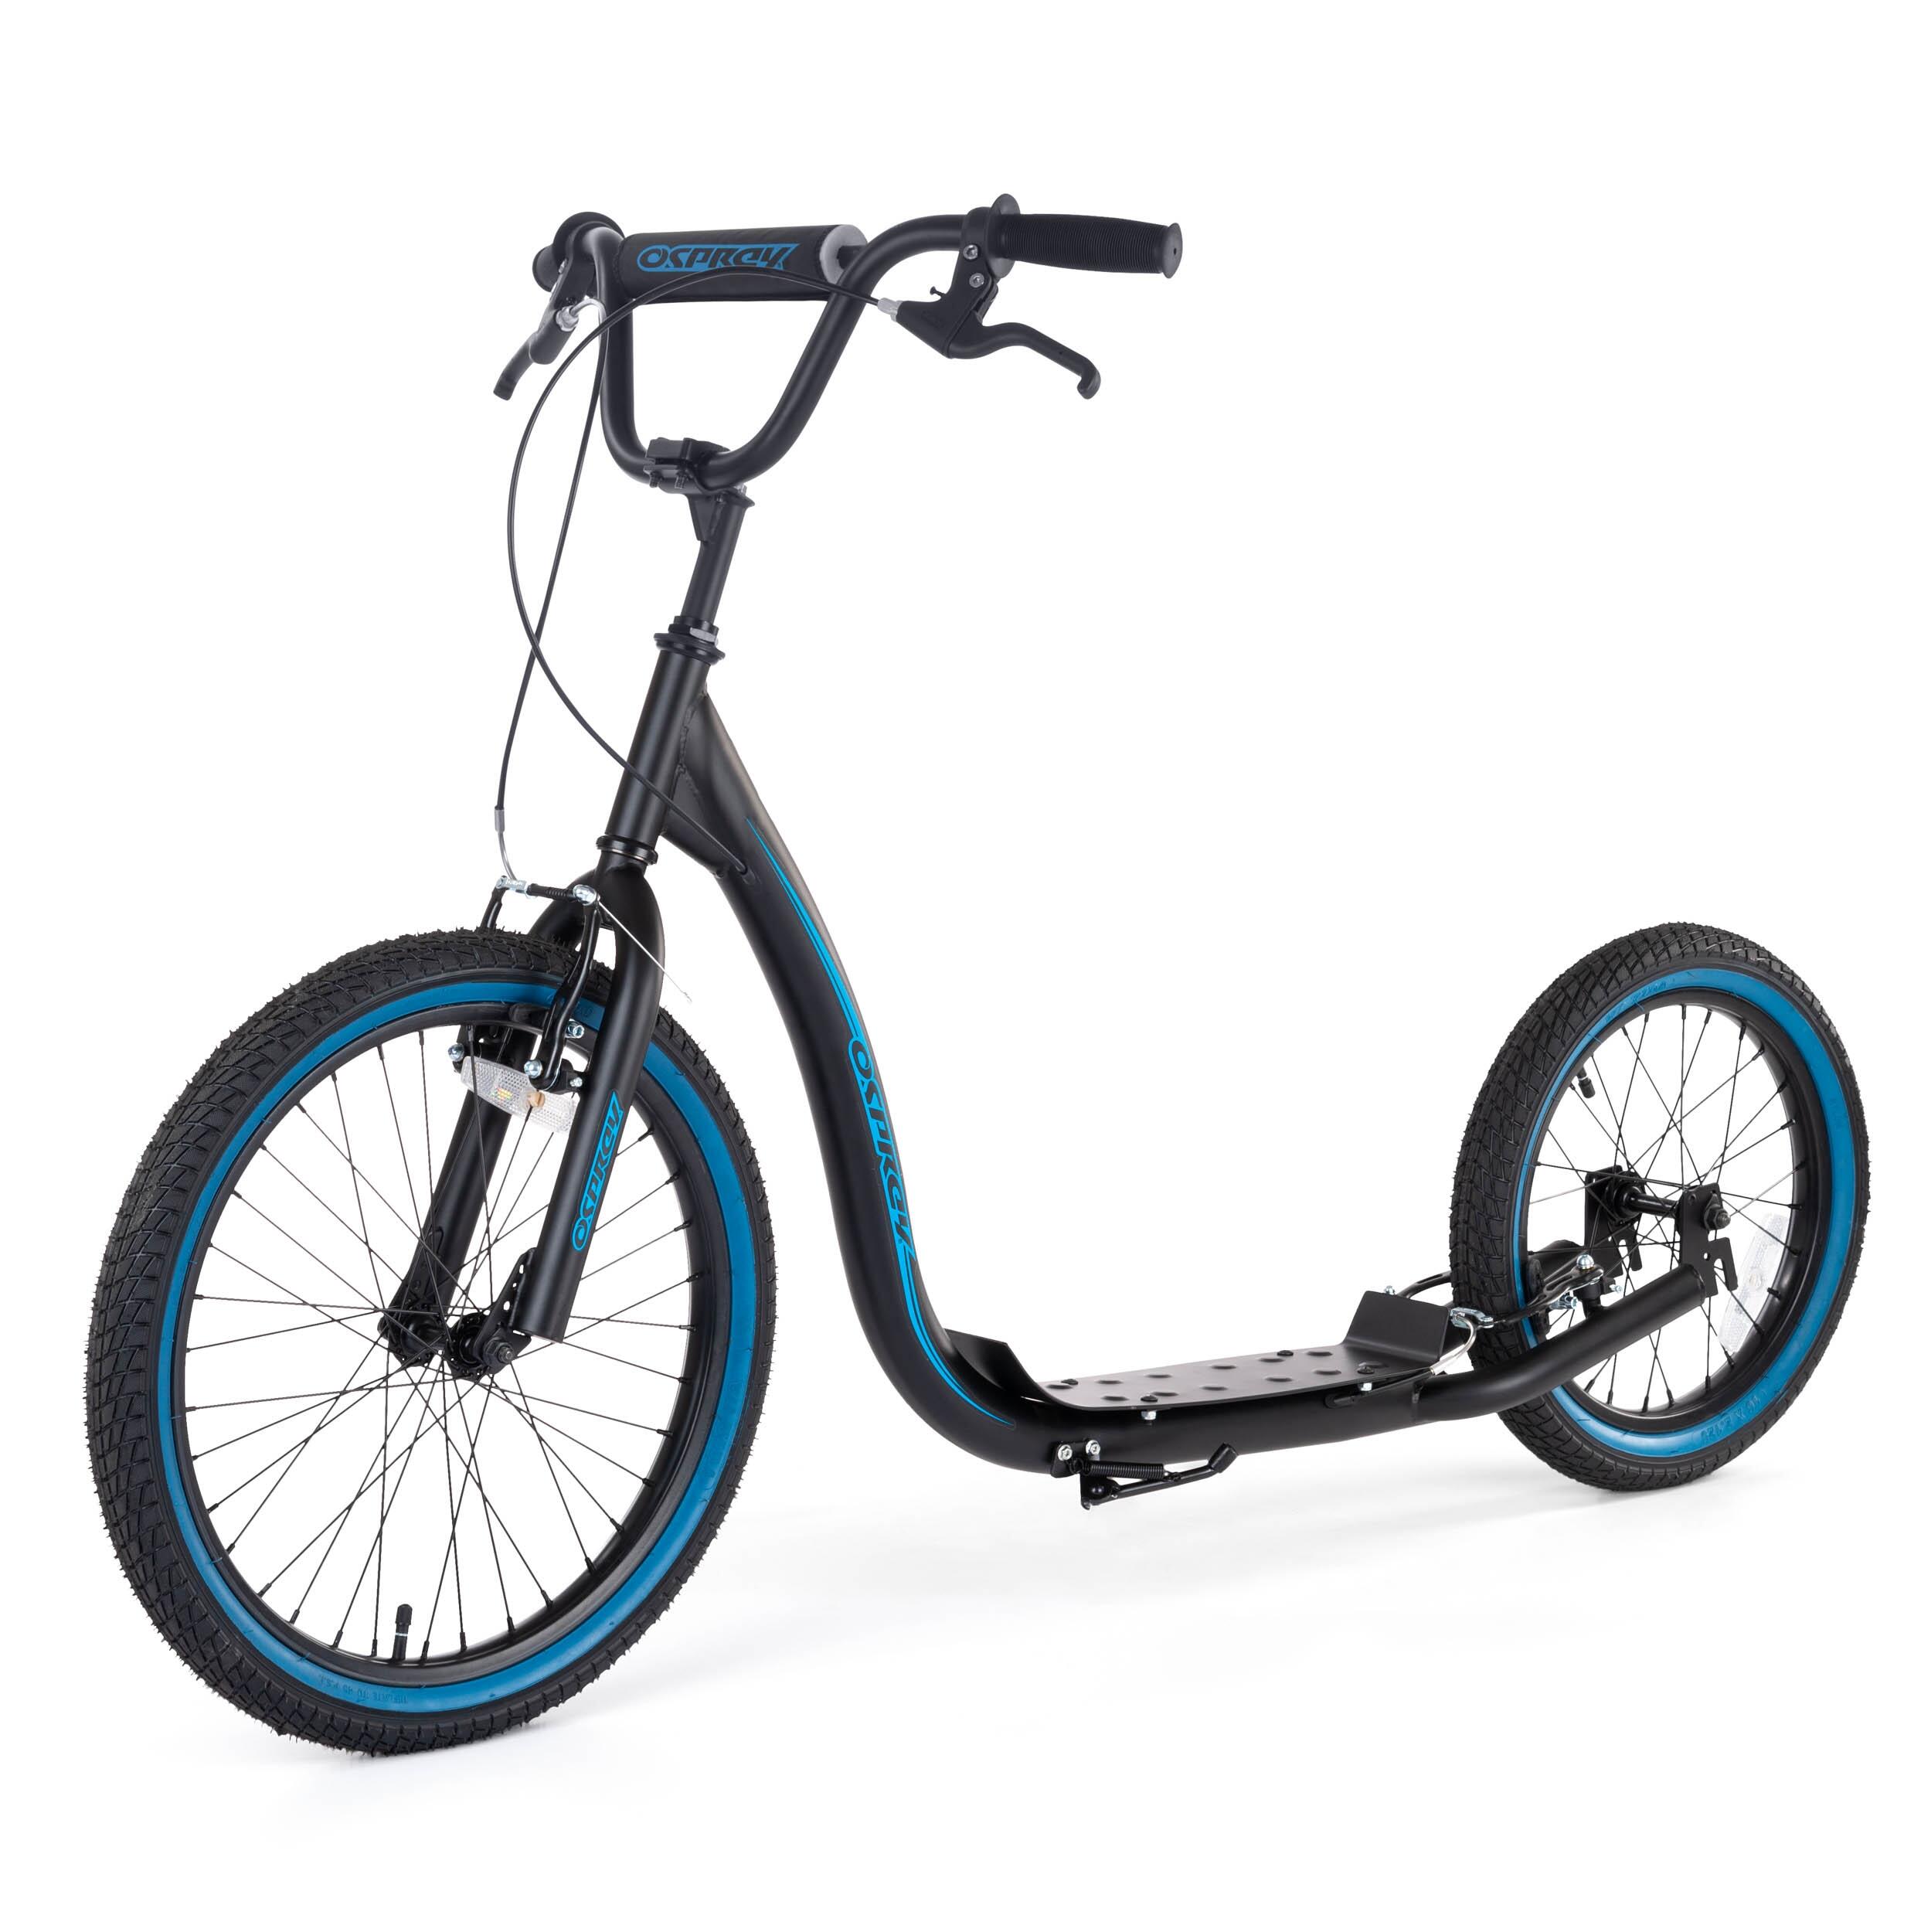 Osprey BMX Scooter, Off-Road Scooter Adult Scooter, Black 1/4